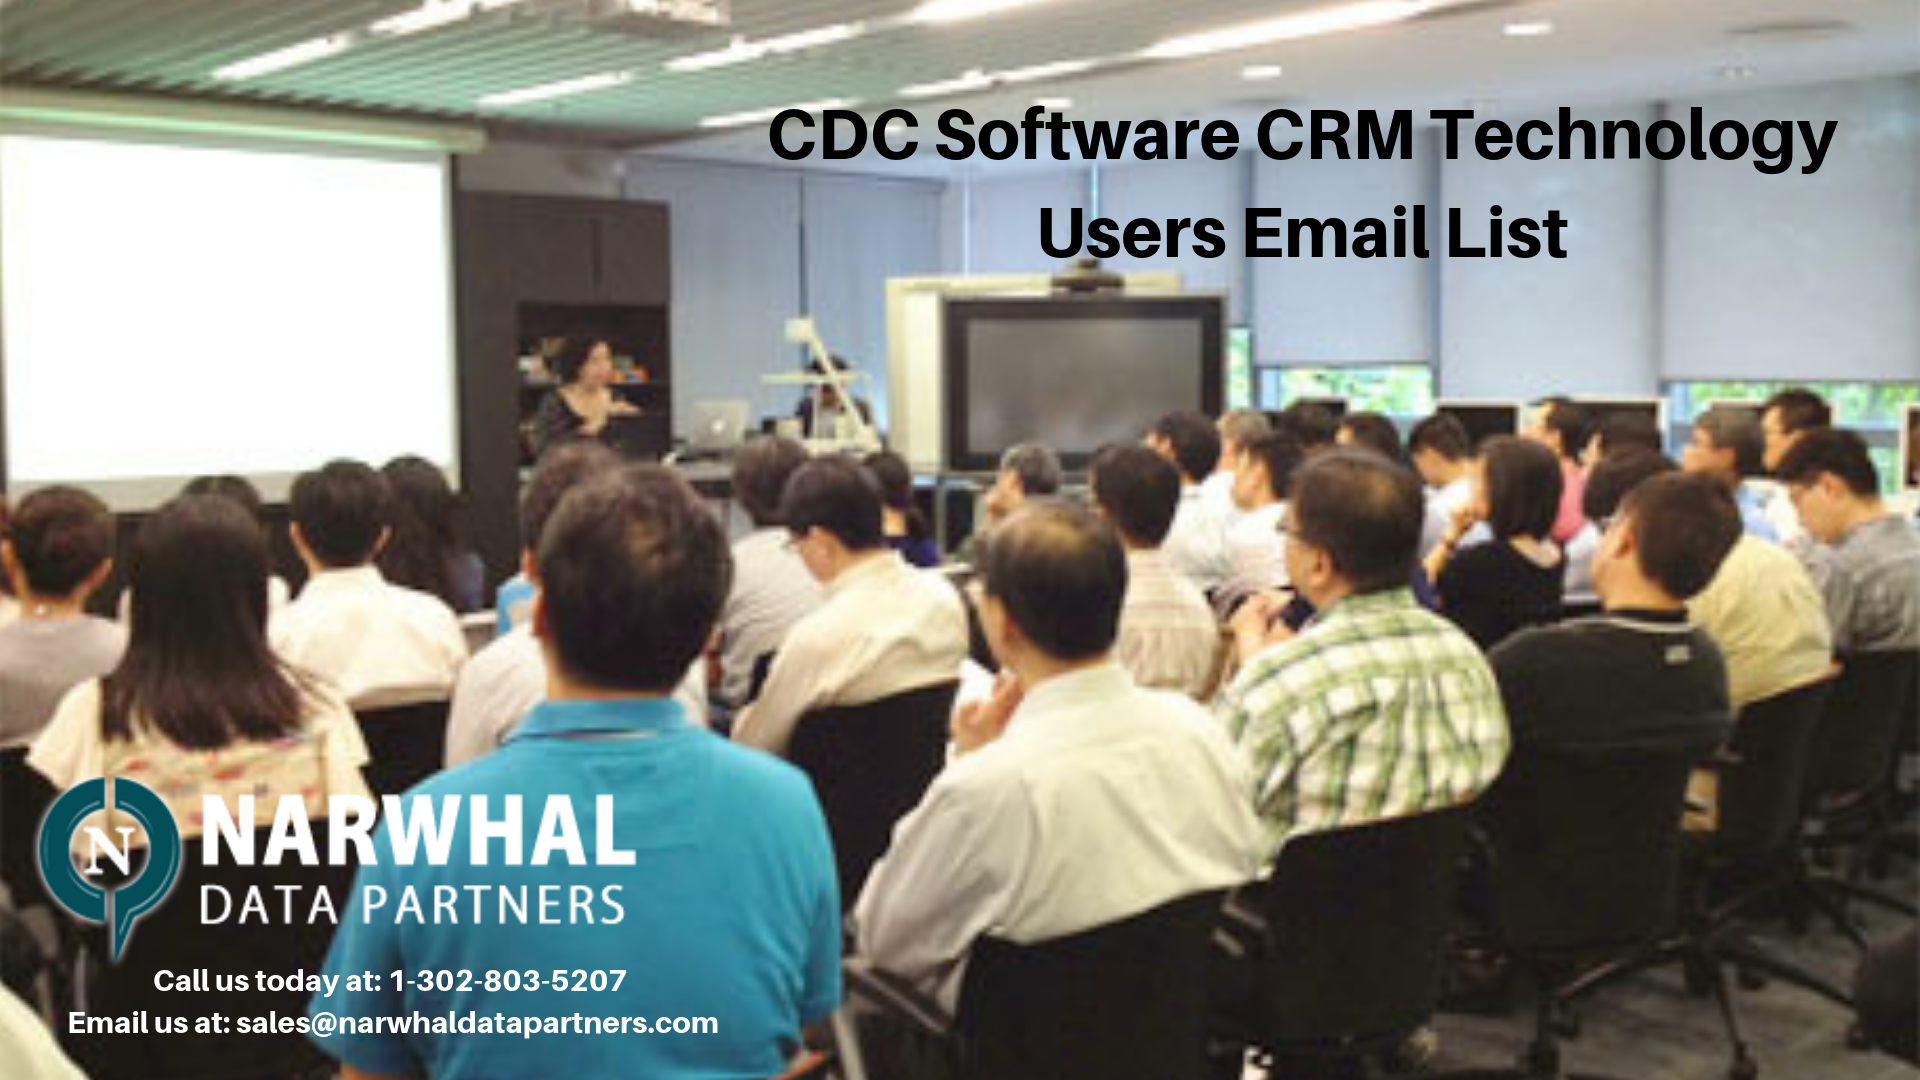 http://narwhaldatapartners.com/cdc-software-crm-technology-users-email-list.html